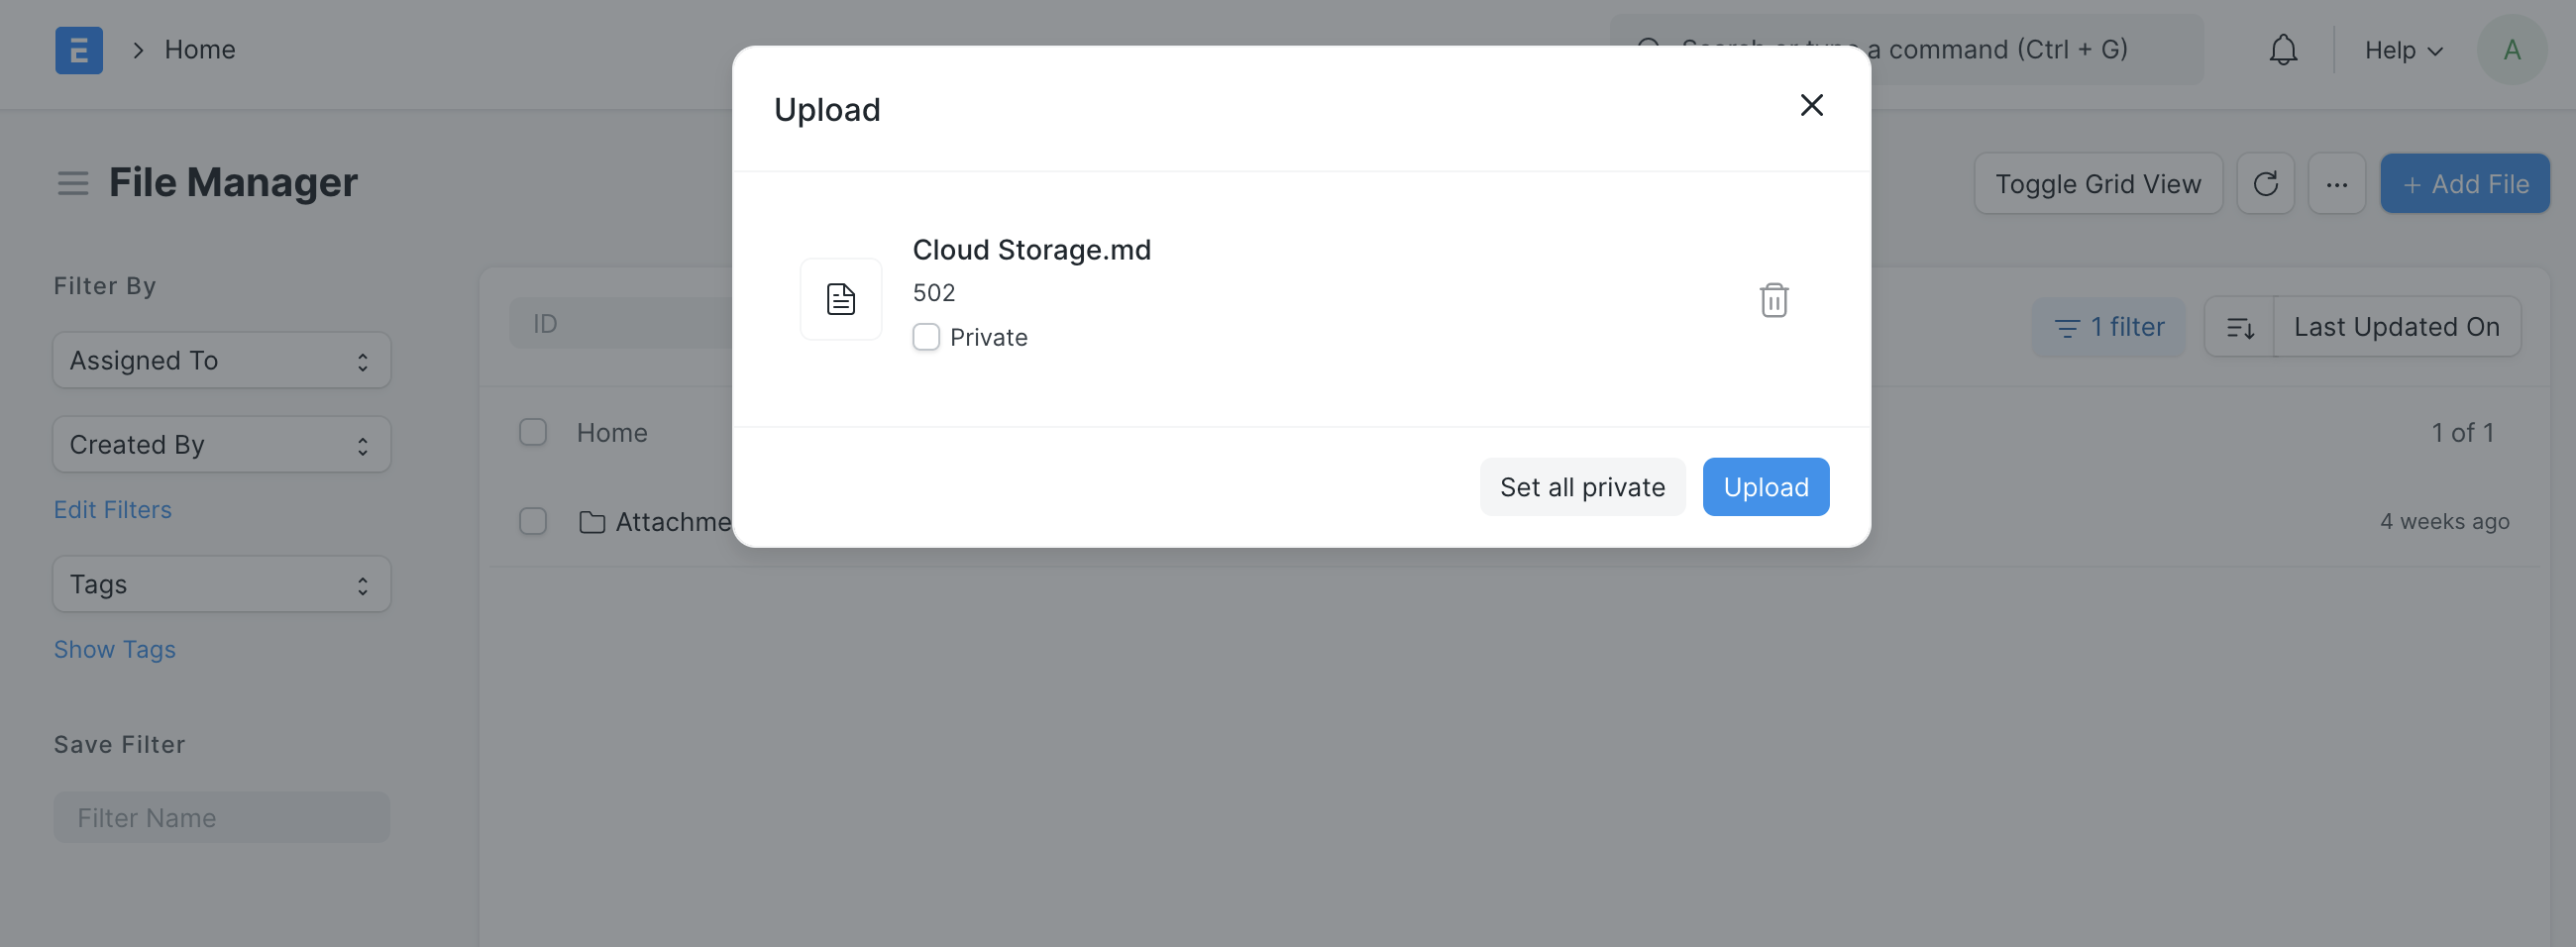 Upload file dialogue box showing a new, non-private file called "Cloud_Storage.md" being uploaded to the system.